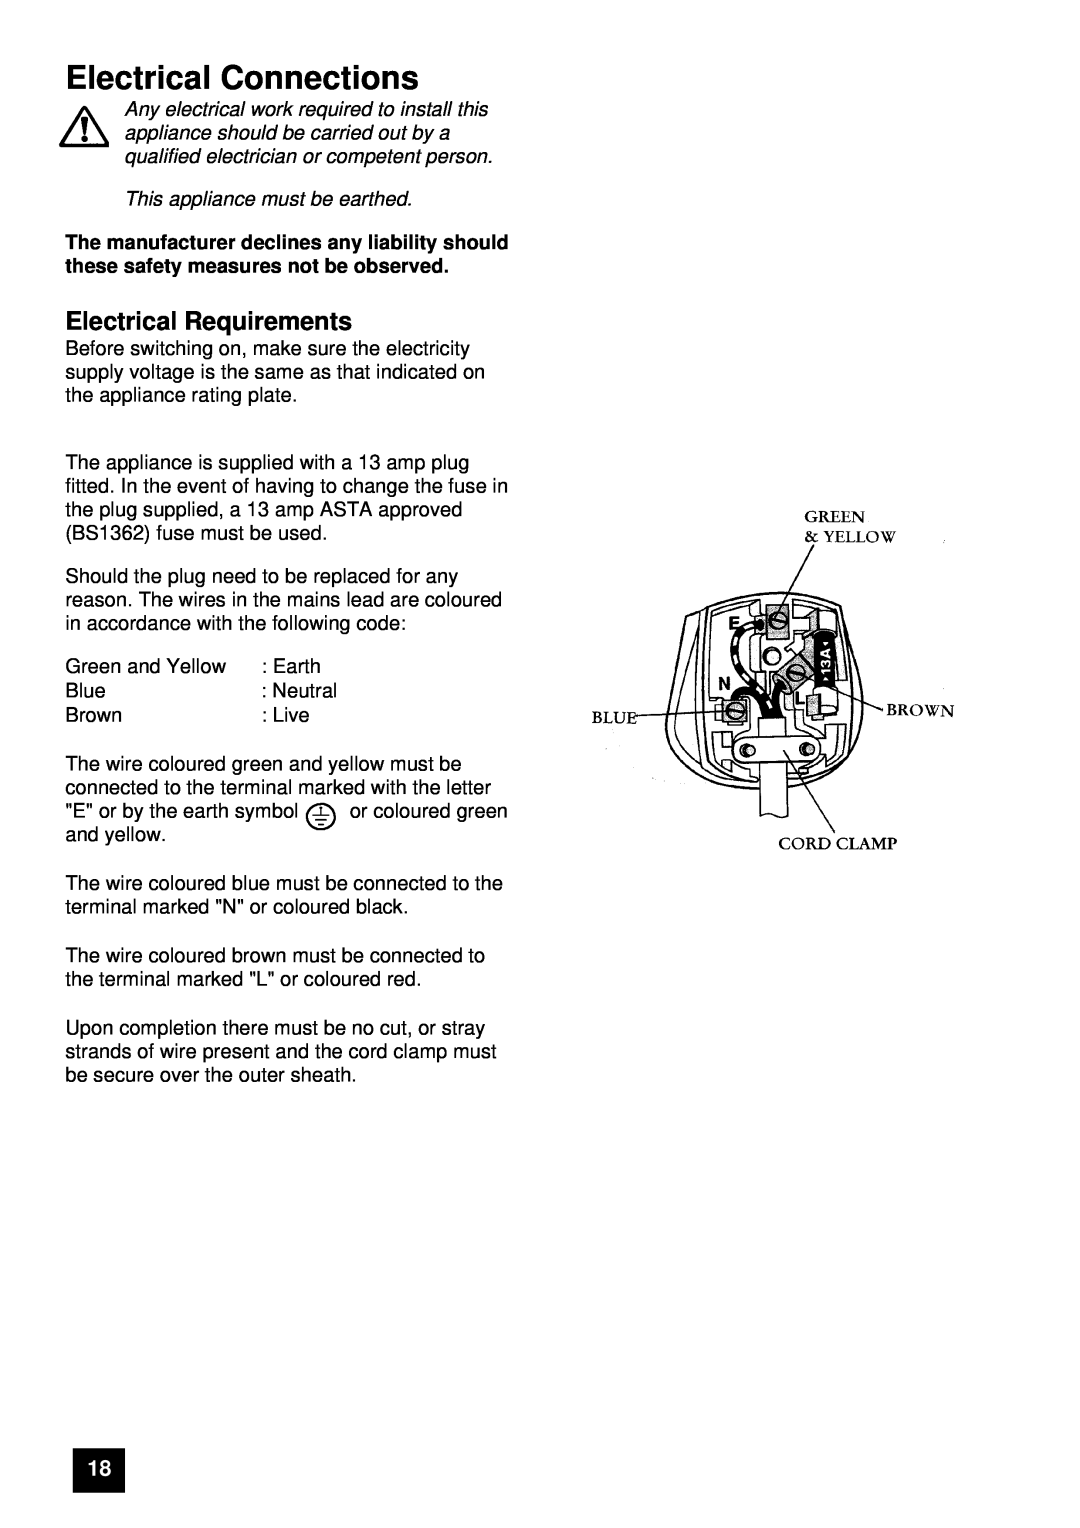 Electrolux ER 7656B, ER 7657B instruction manual Electrical Connections, Electrical Requirements 